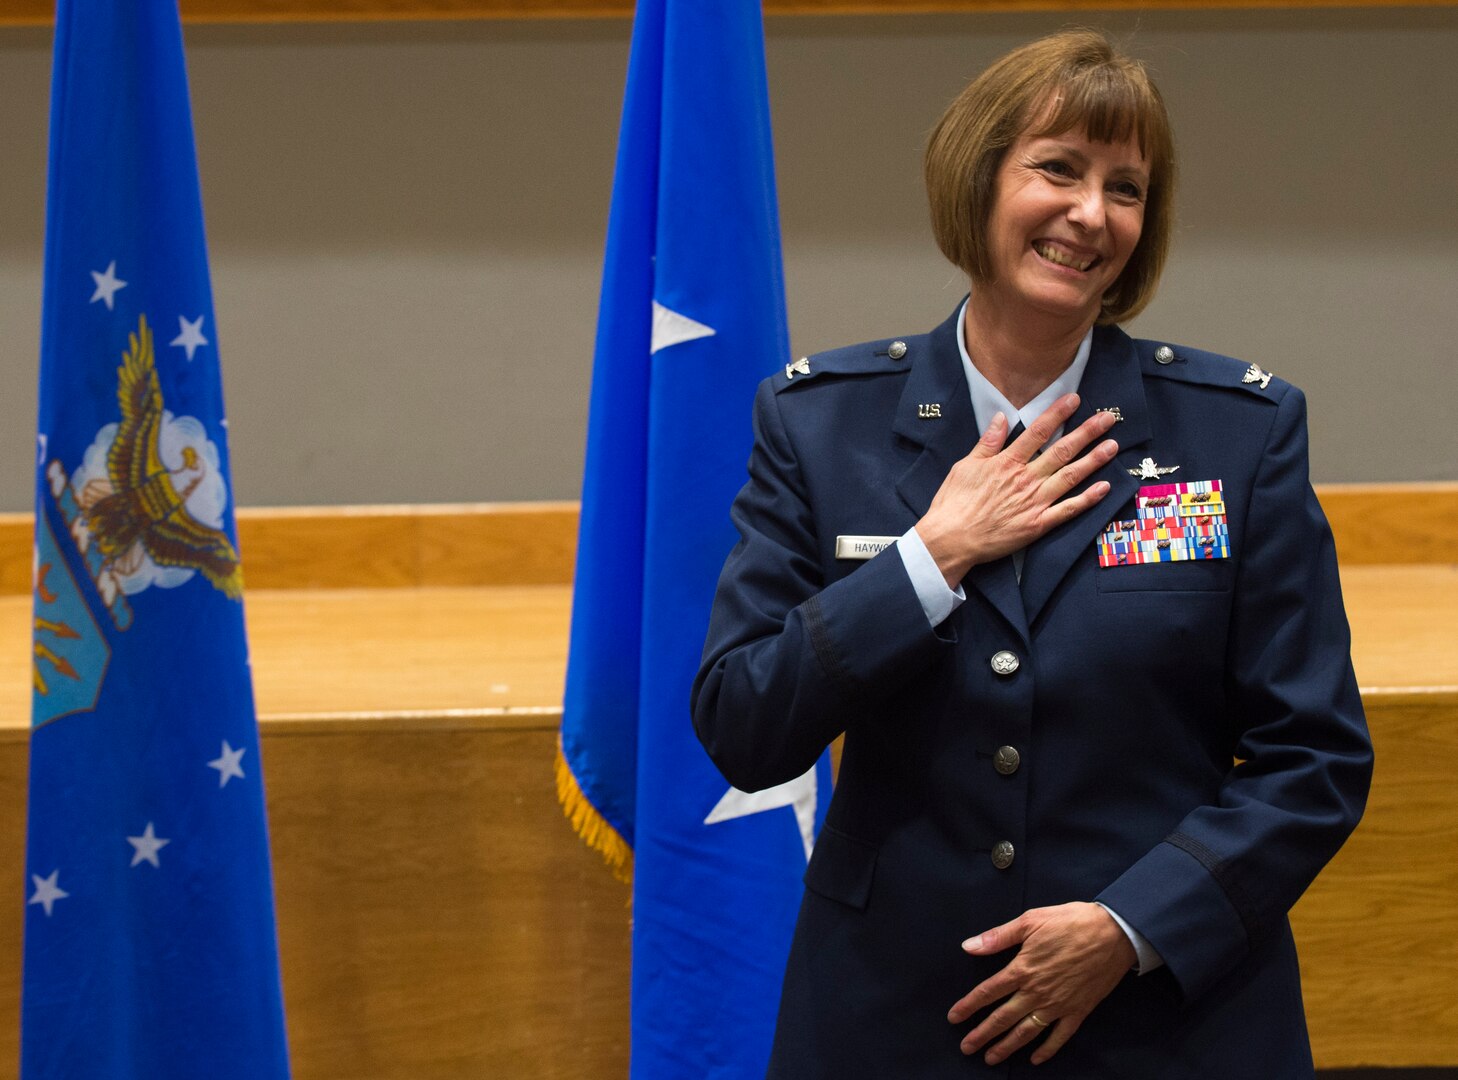 Col. Michelle Hayworth, Air Forces Cyber vice commander, thanks those in attendance during her promotion ceremony to brigadier general at Joint Base San Antonio-Lackland, Texas, July, 16, 2018. In June, Hayworth re-joined AFCYBER from Air Force Space Command. She previously served in AFCYBER, most recently as the 688th Cyberspace Wing Commander. (U.S. Air Force photo by Tech. Sgt. R.J. Biermann)